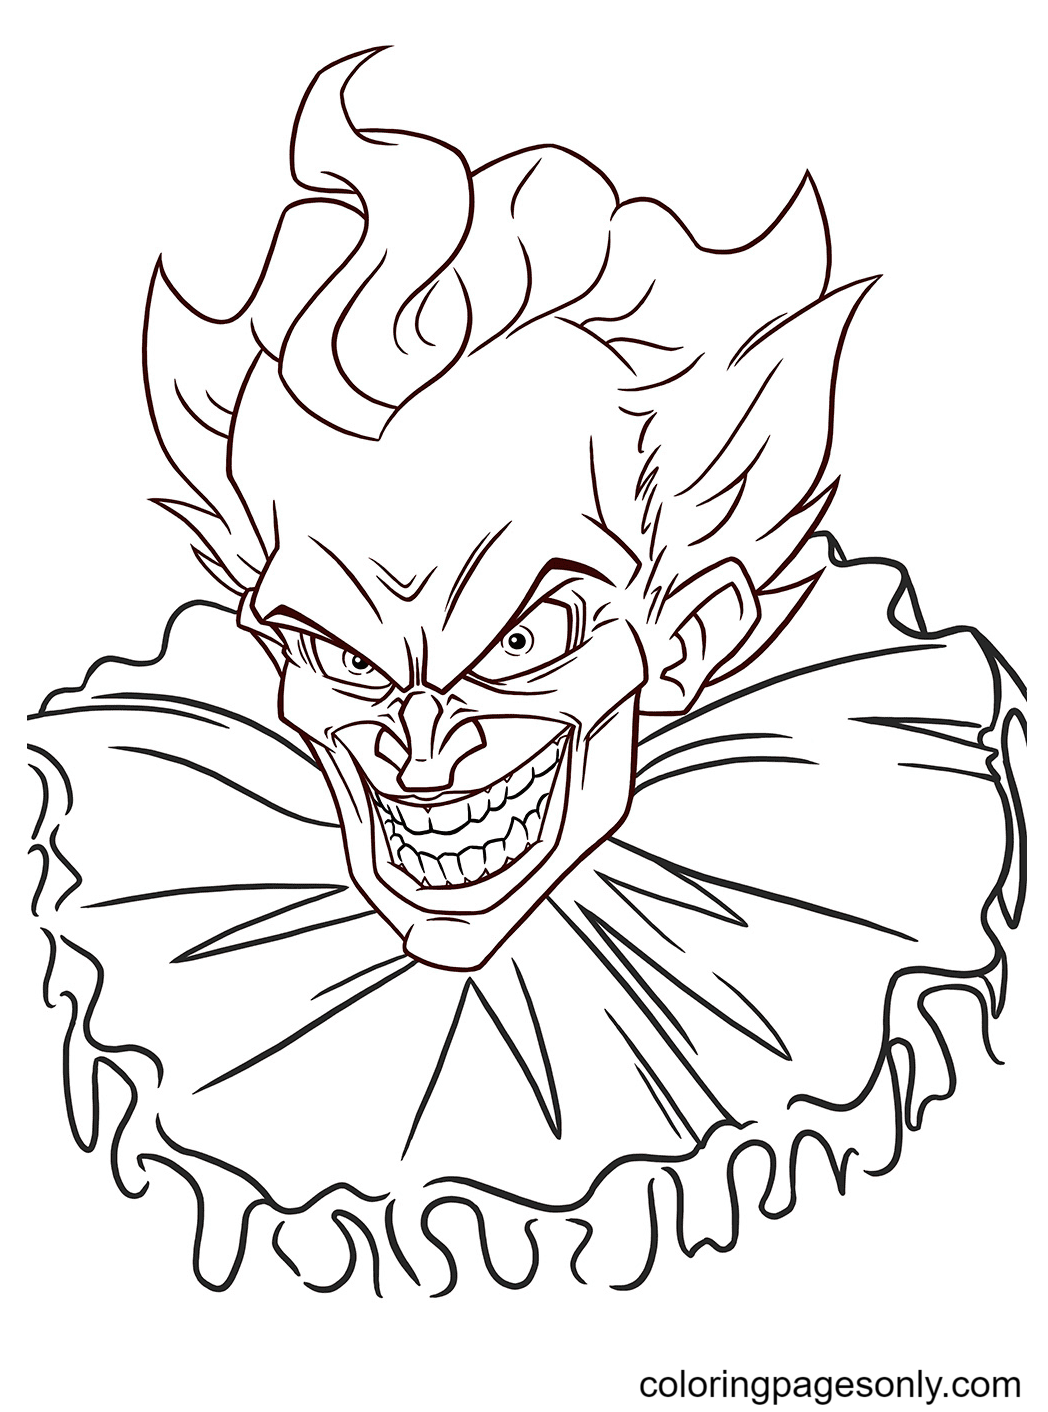 Clown Pennywise Printable Coloring Page